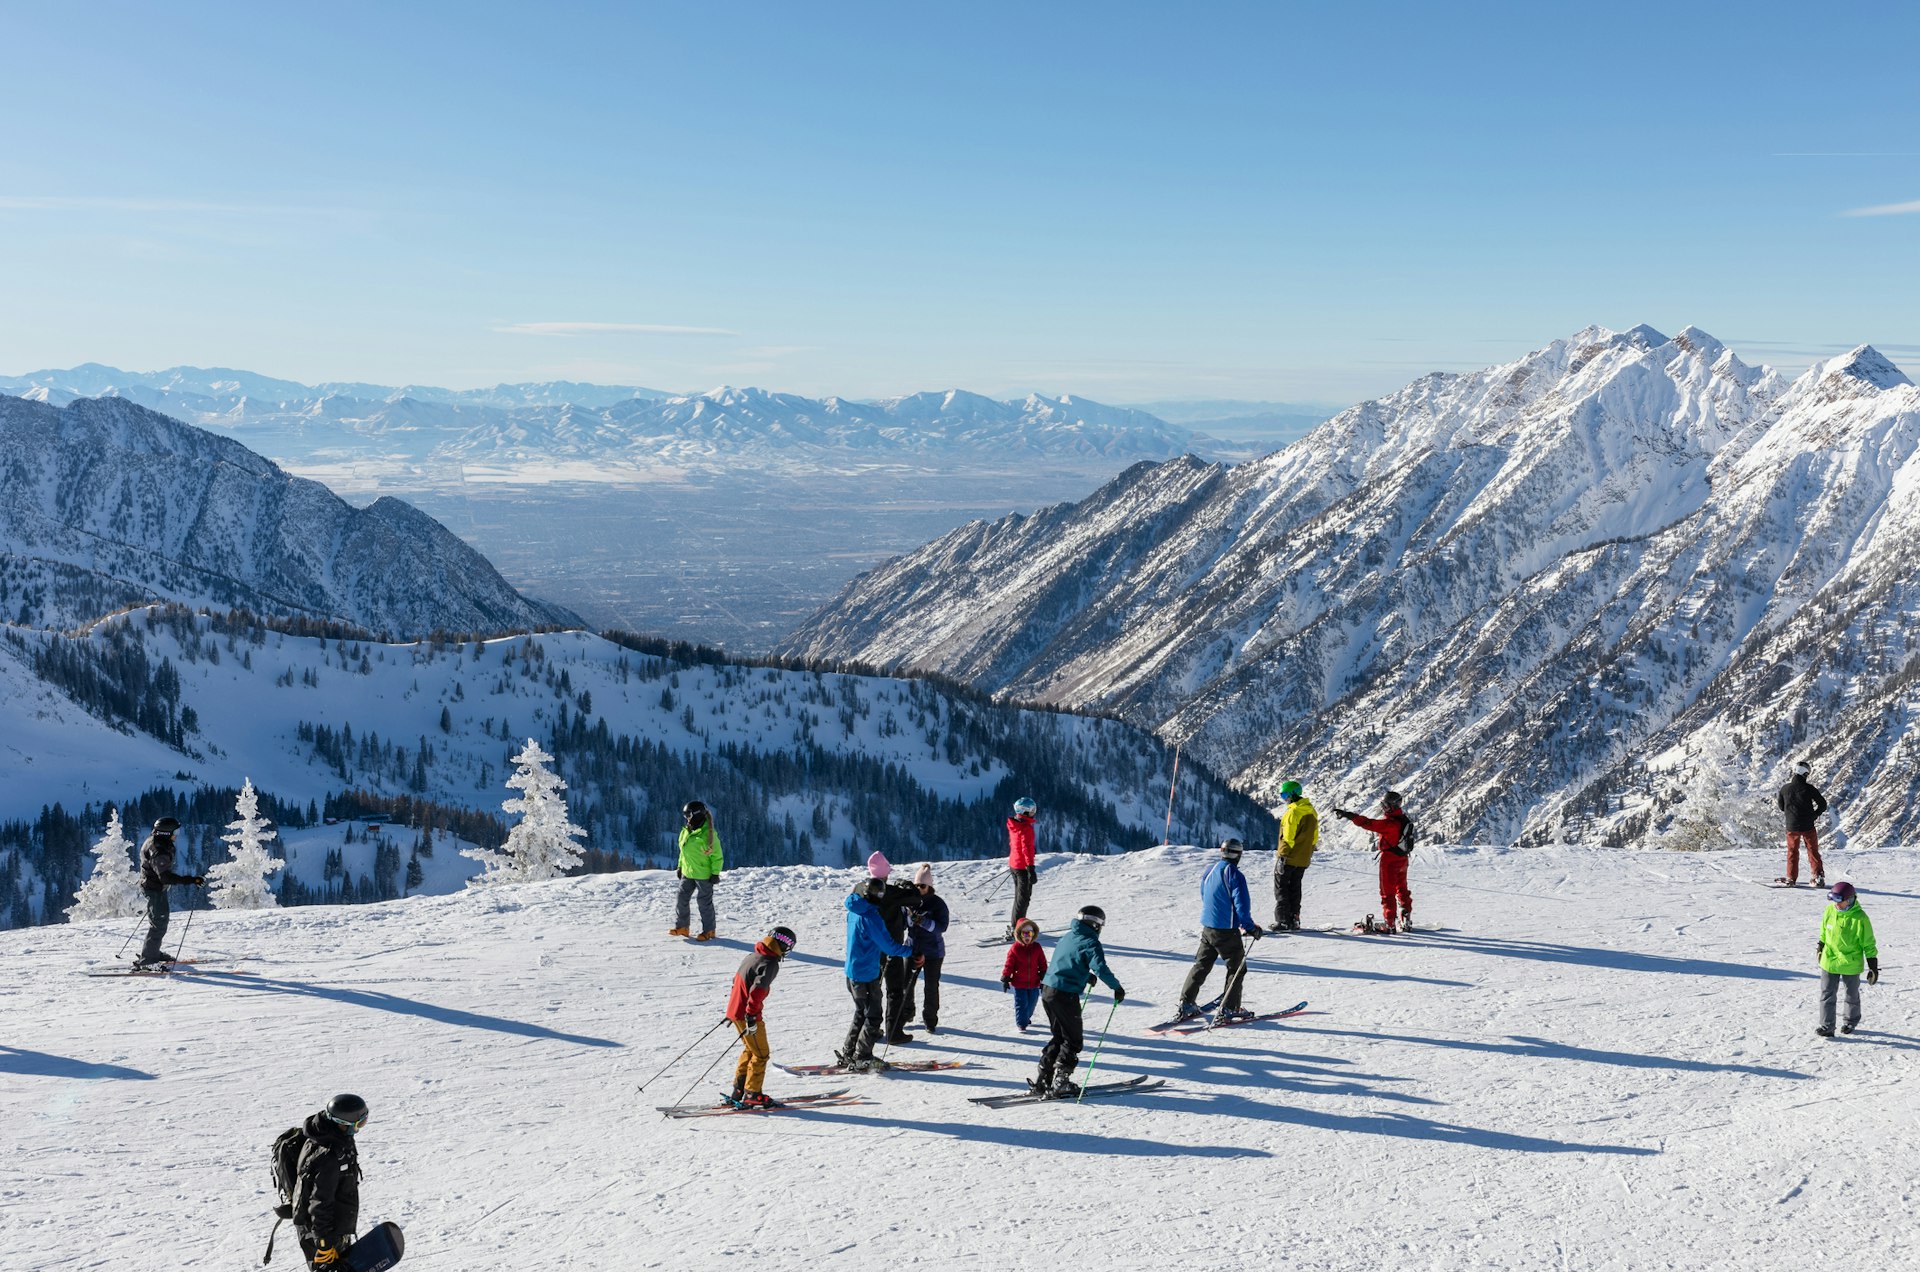 Skiers and snowboarders on top of a snowy peak with mountains stretching into the distance